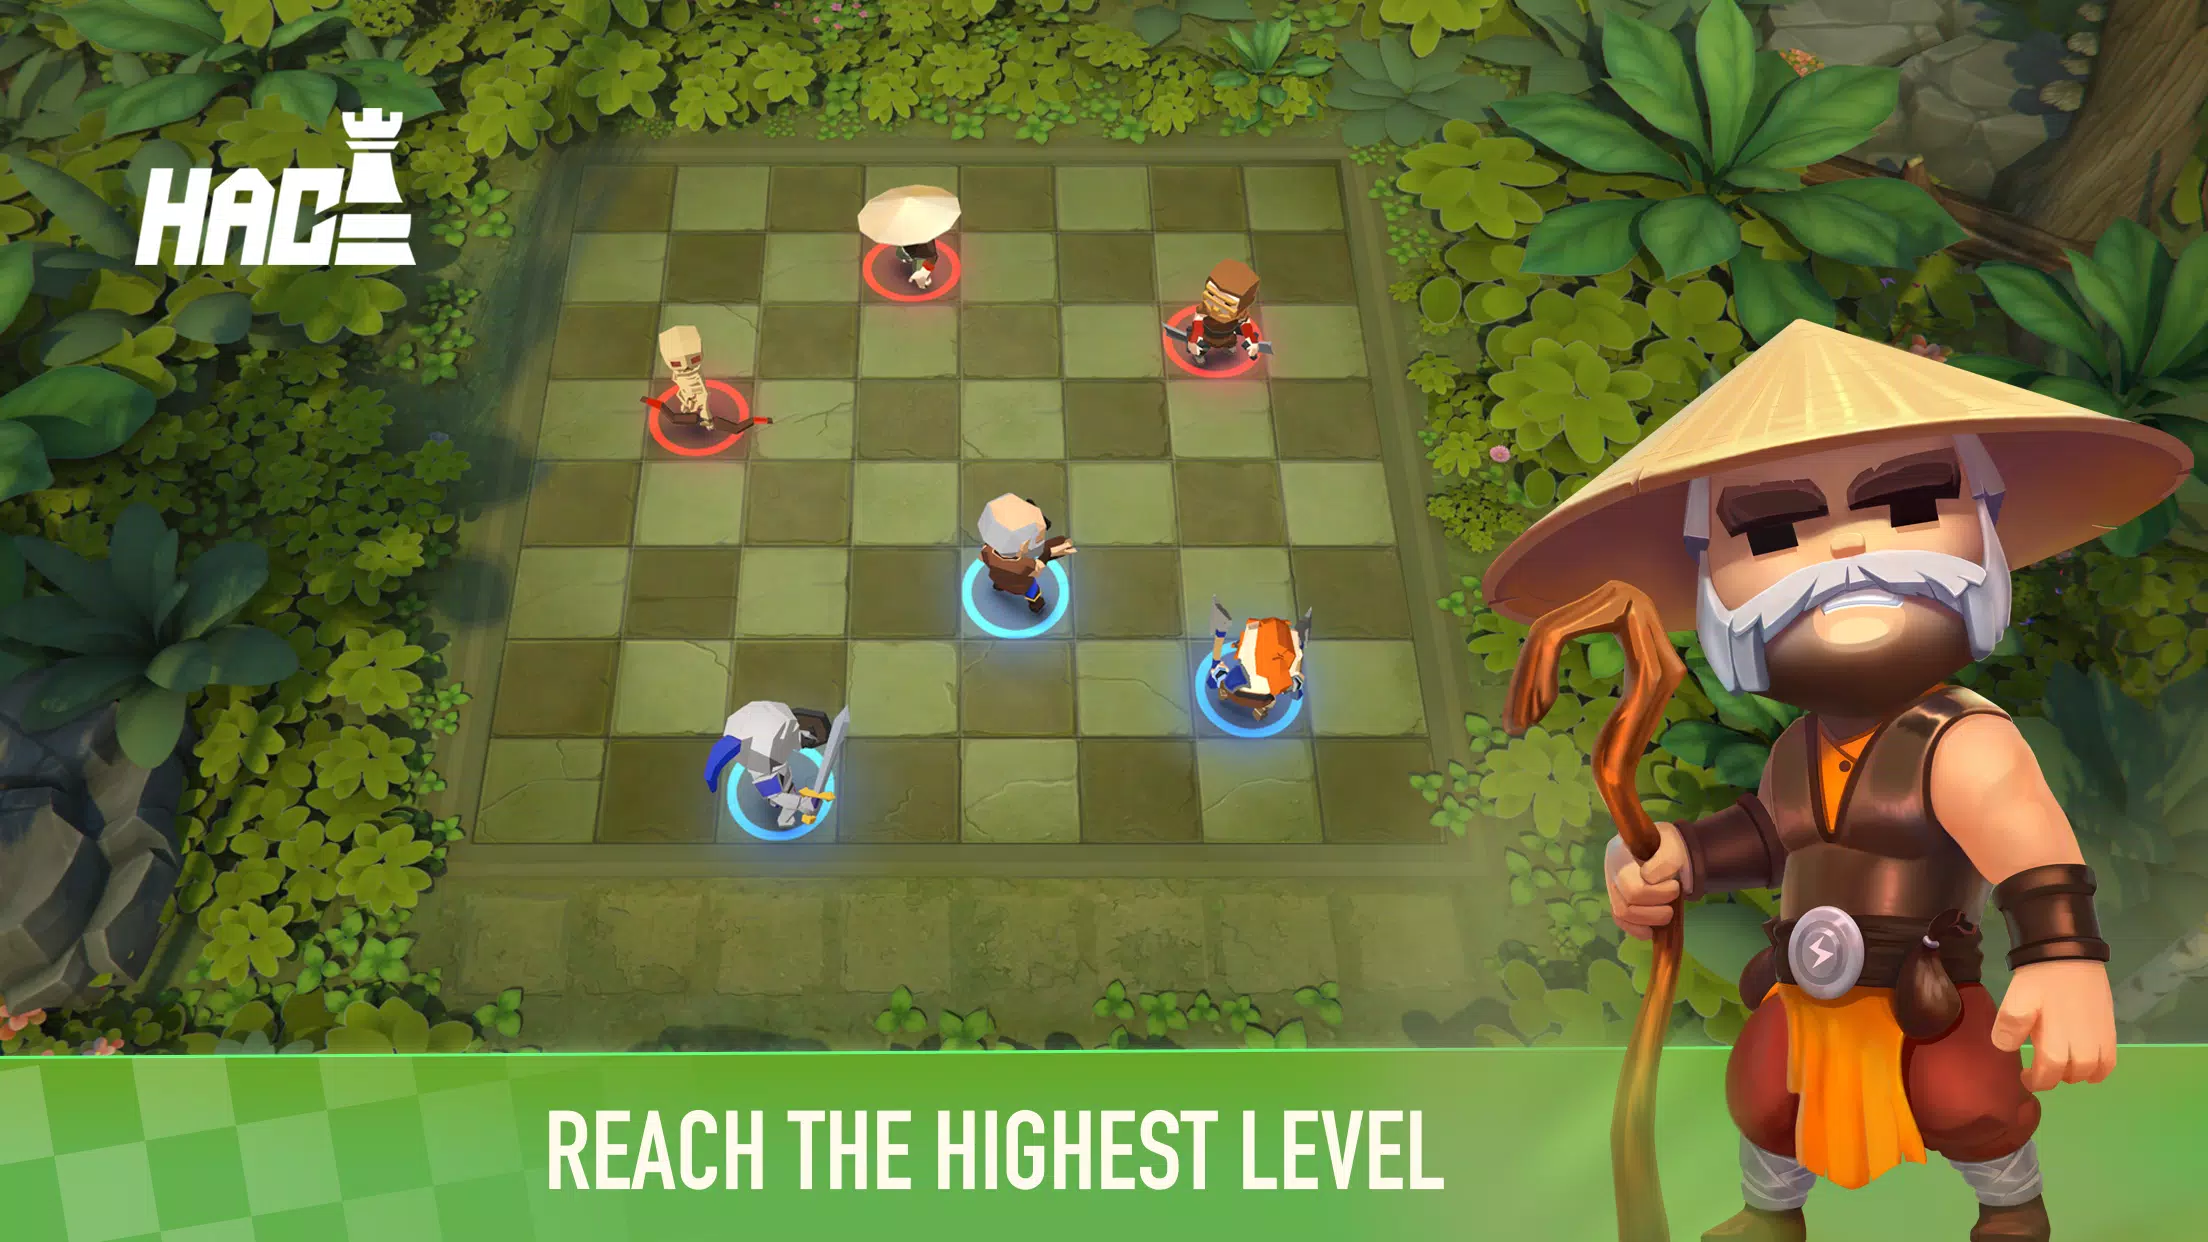 Play Auto Chess Games Online on PC & Mobile (FREE)